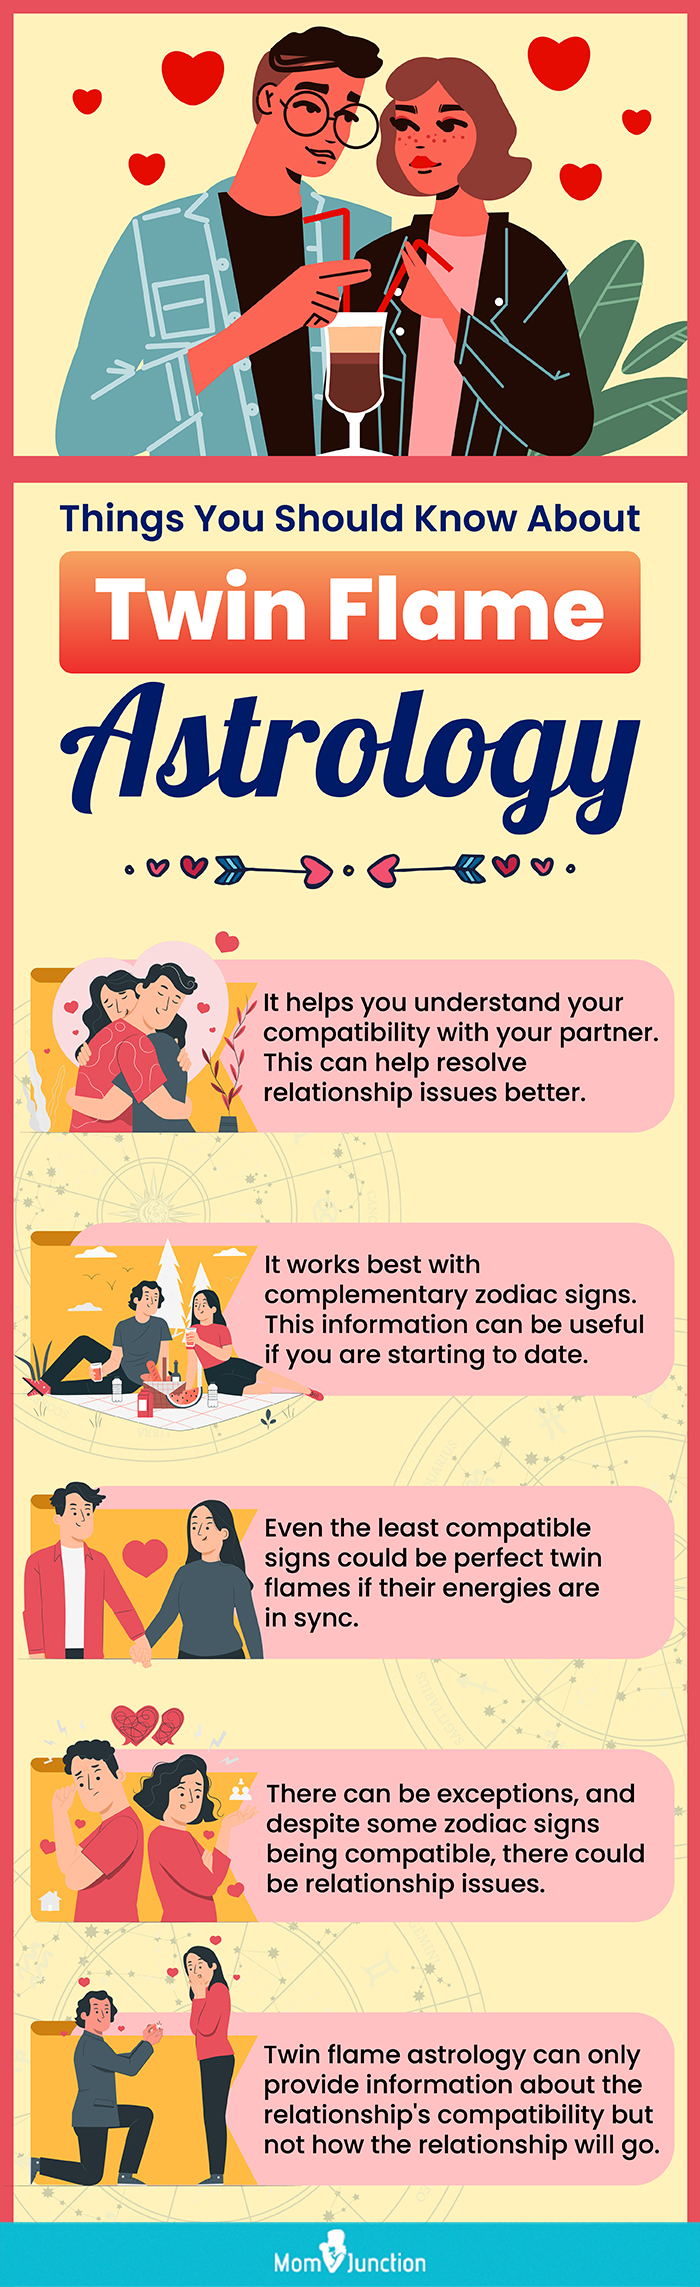 twin flame astrology [infographic]